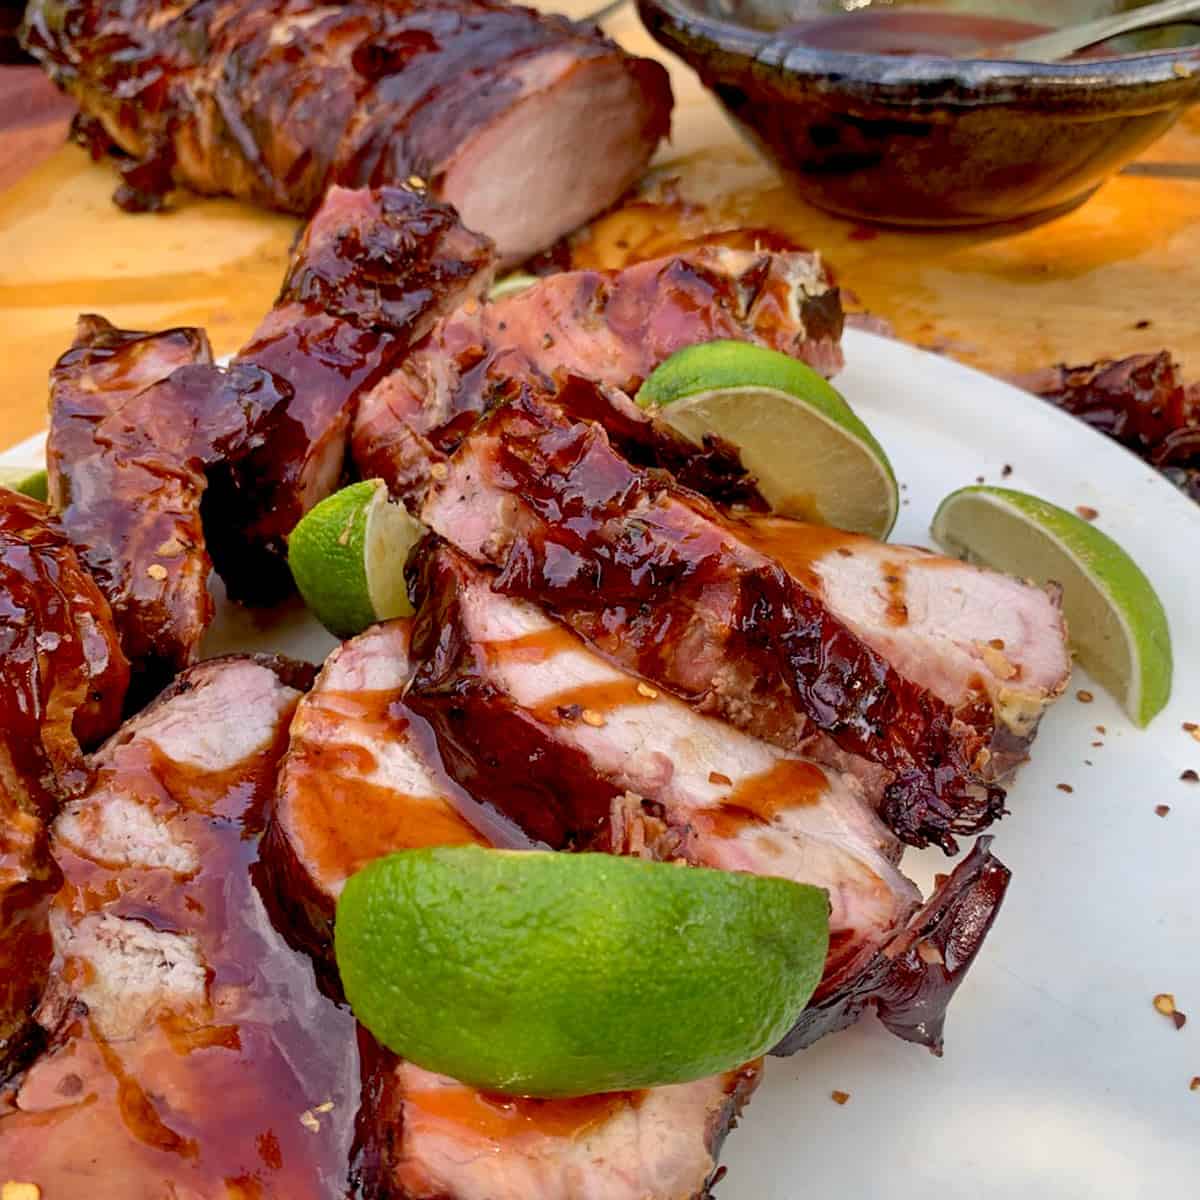 A plate of meat with lime wedges.